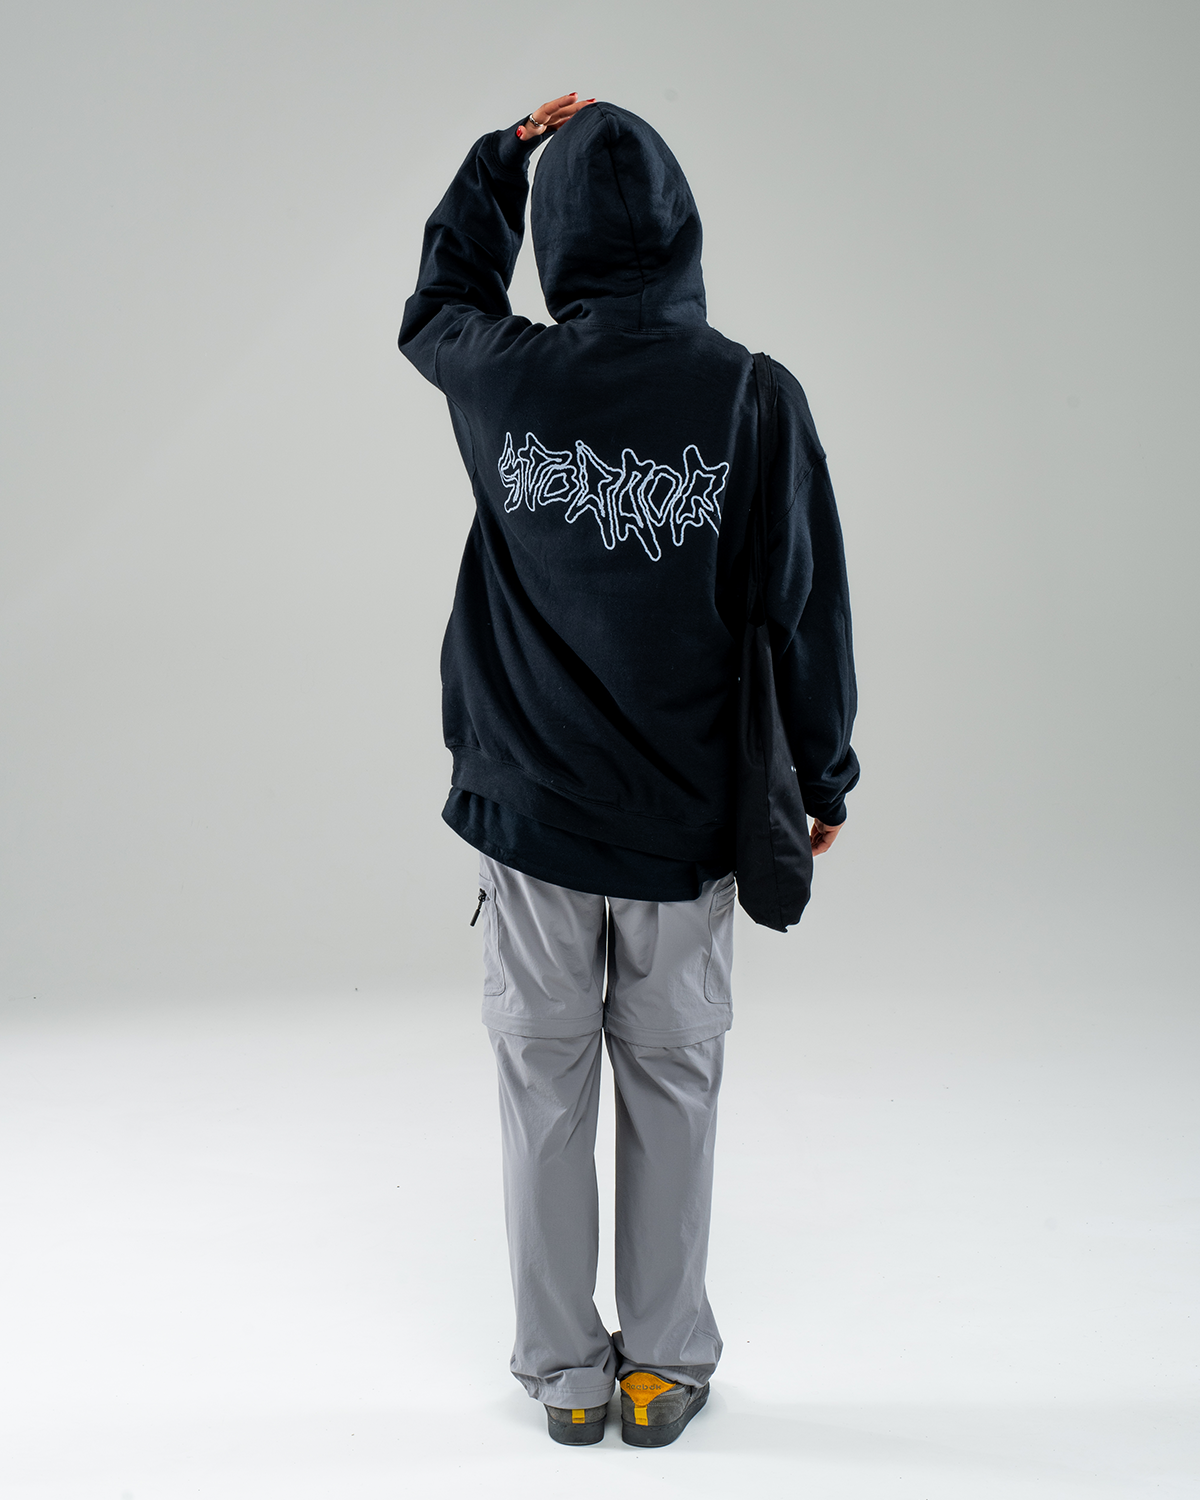 RECOGNITION HOODIE